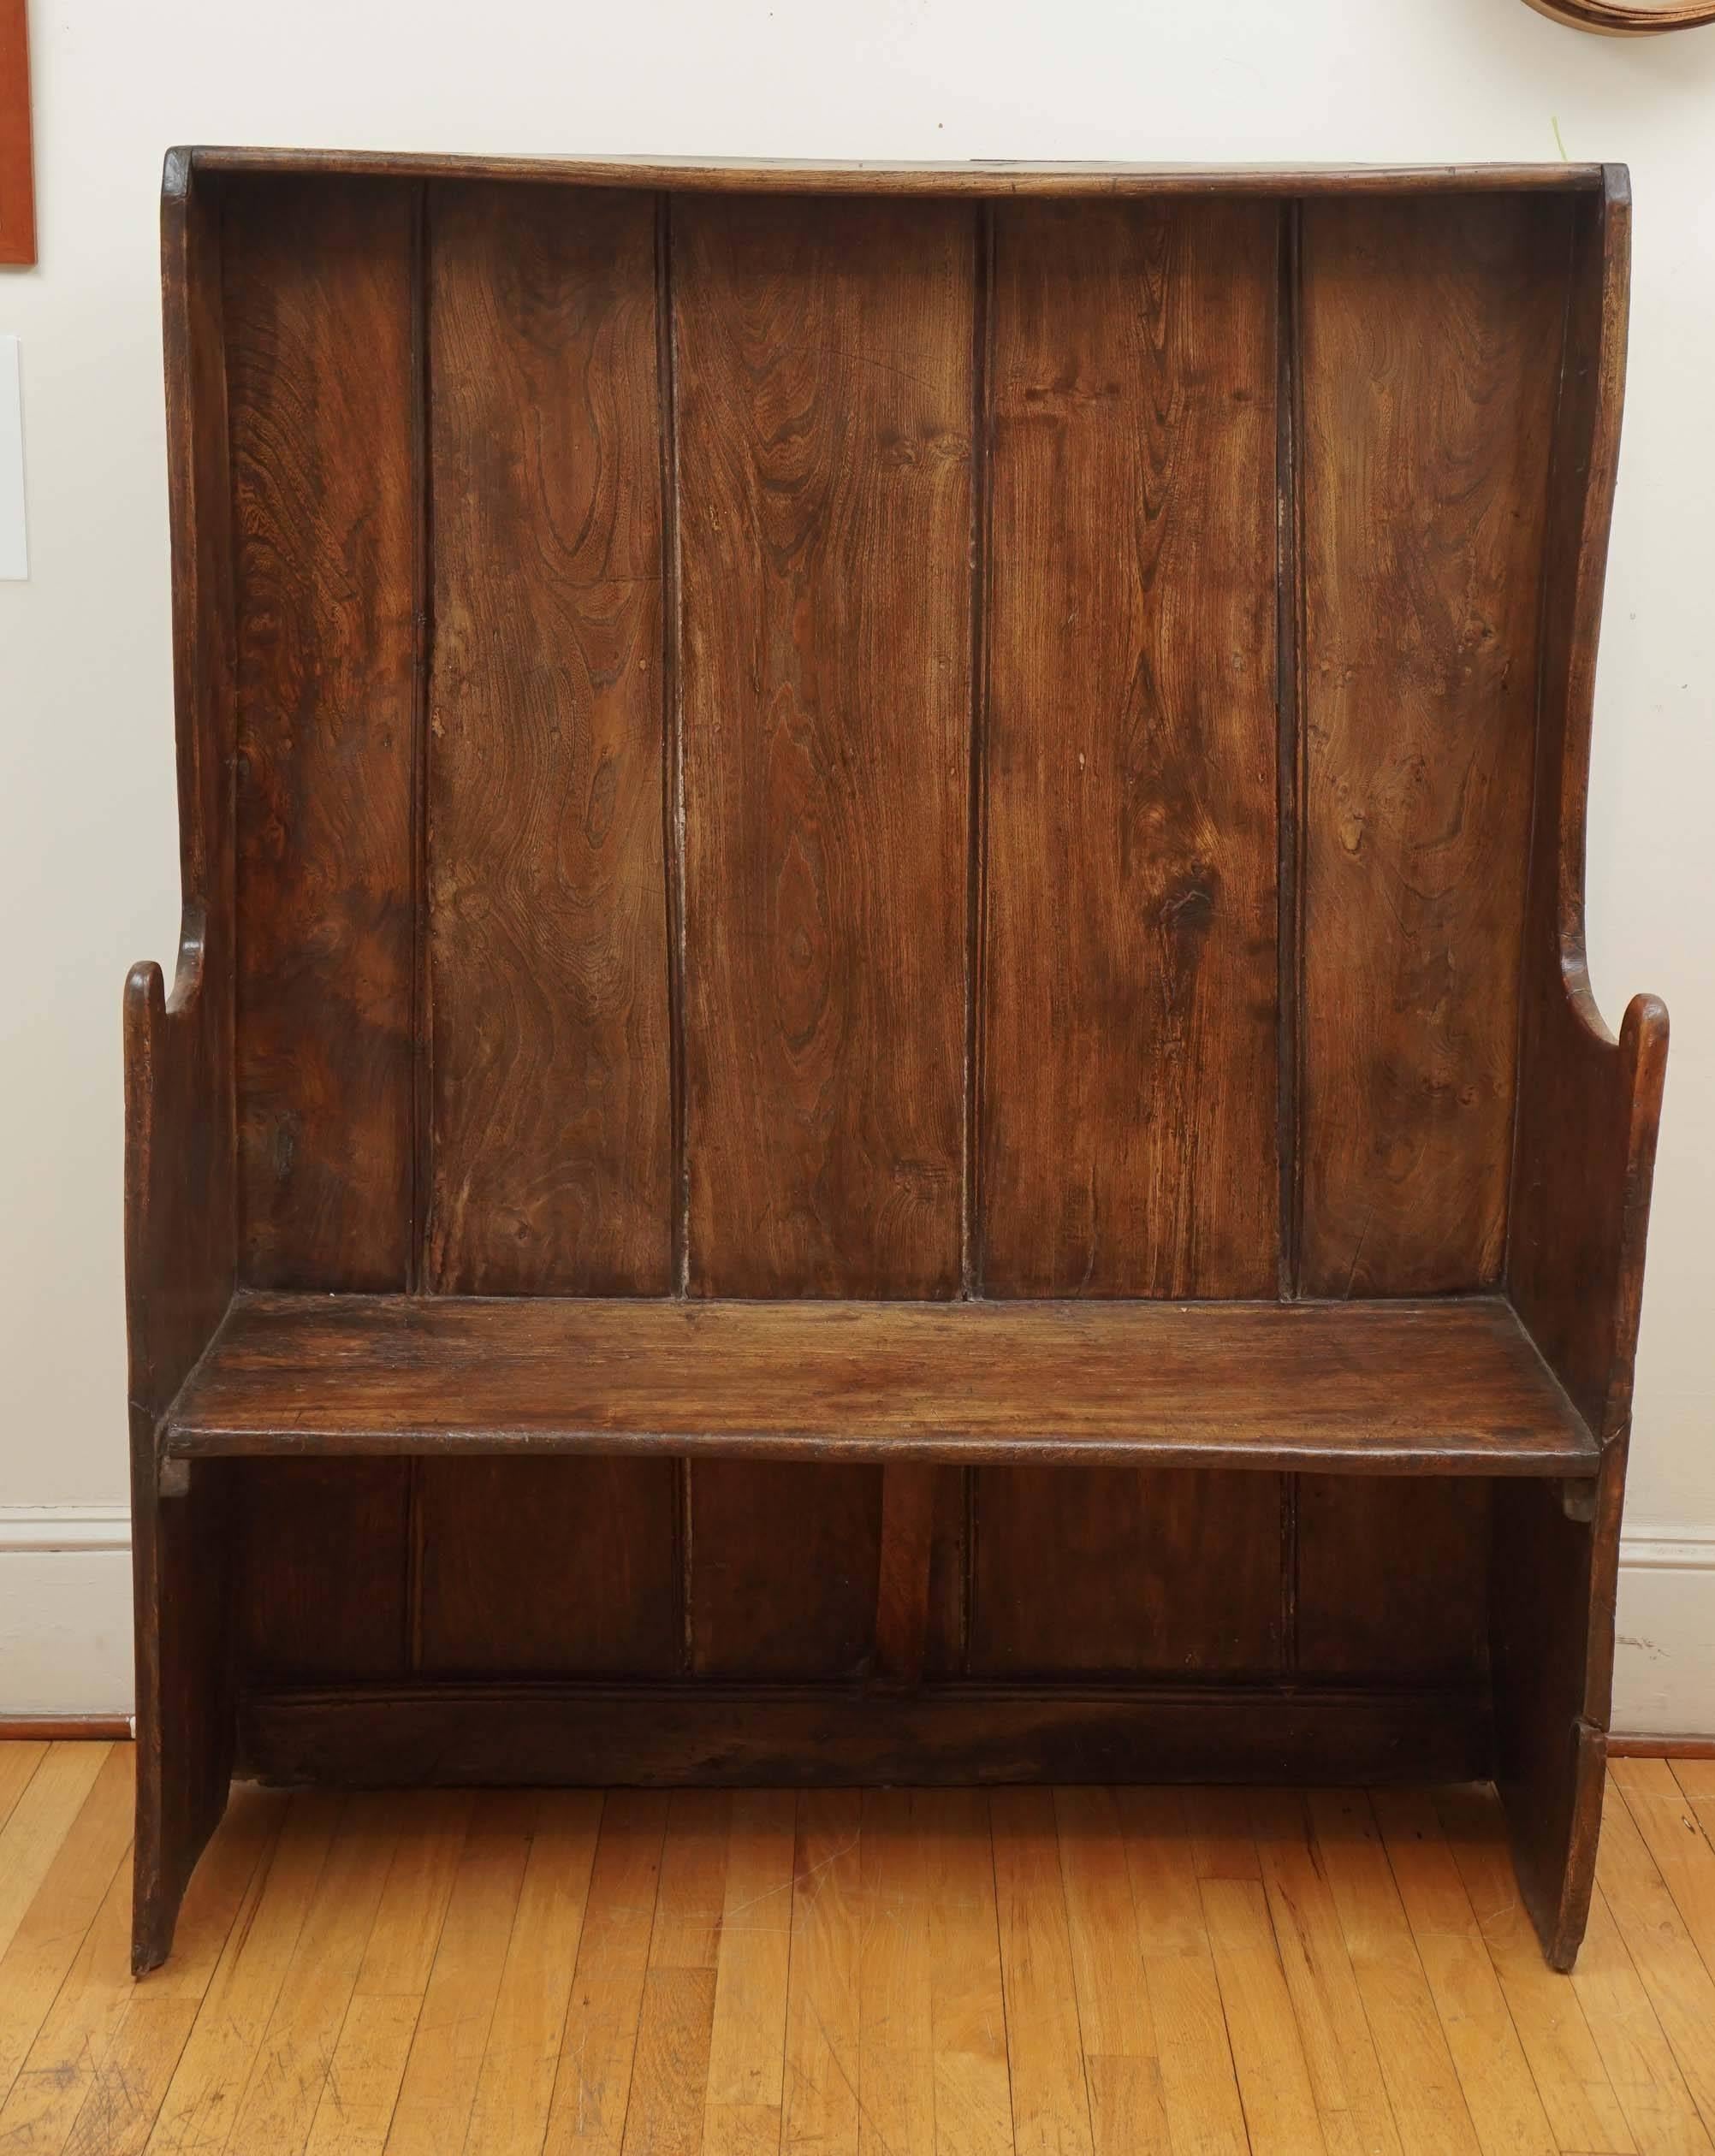 It is not often we find an 18th century piece of furniture. This settle came from a pub in Northern UK and shows its age and yet still remains sturdy. What we like is its size. It is not massive and would be a great hallway or mudroom piece.